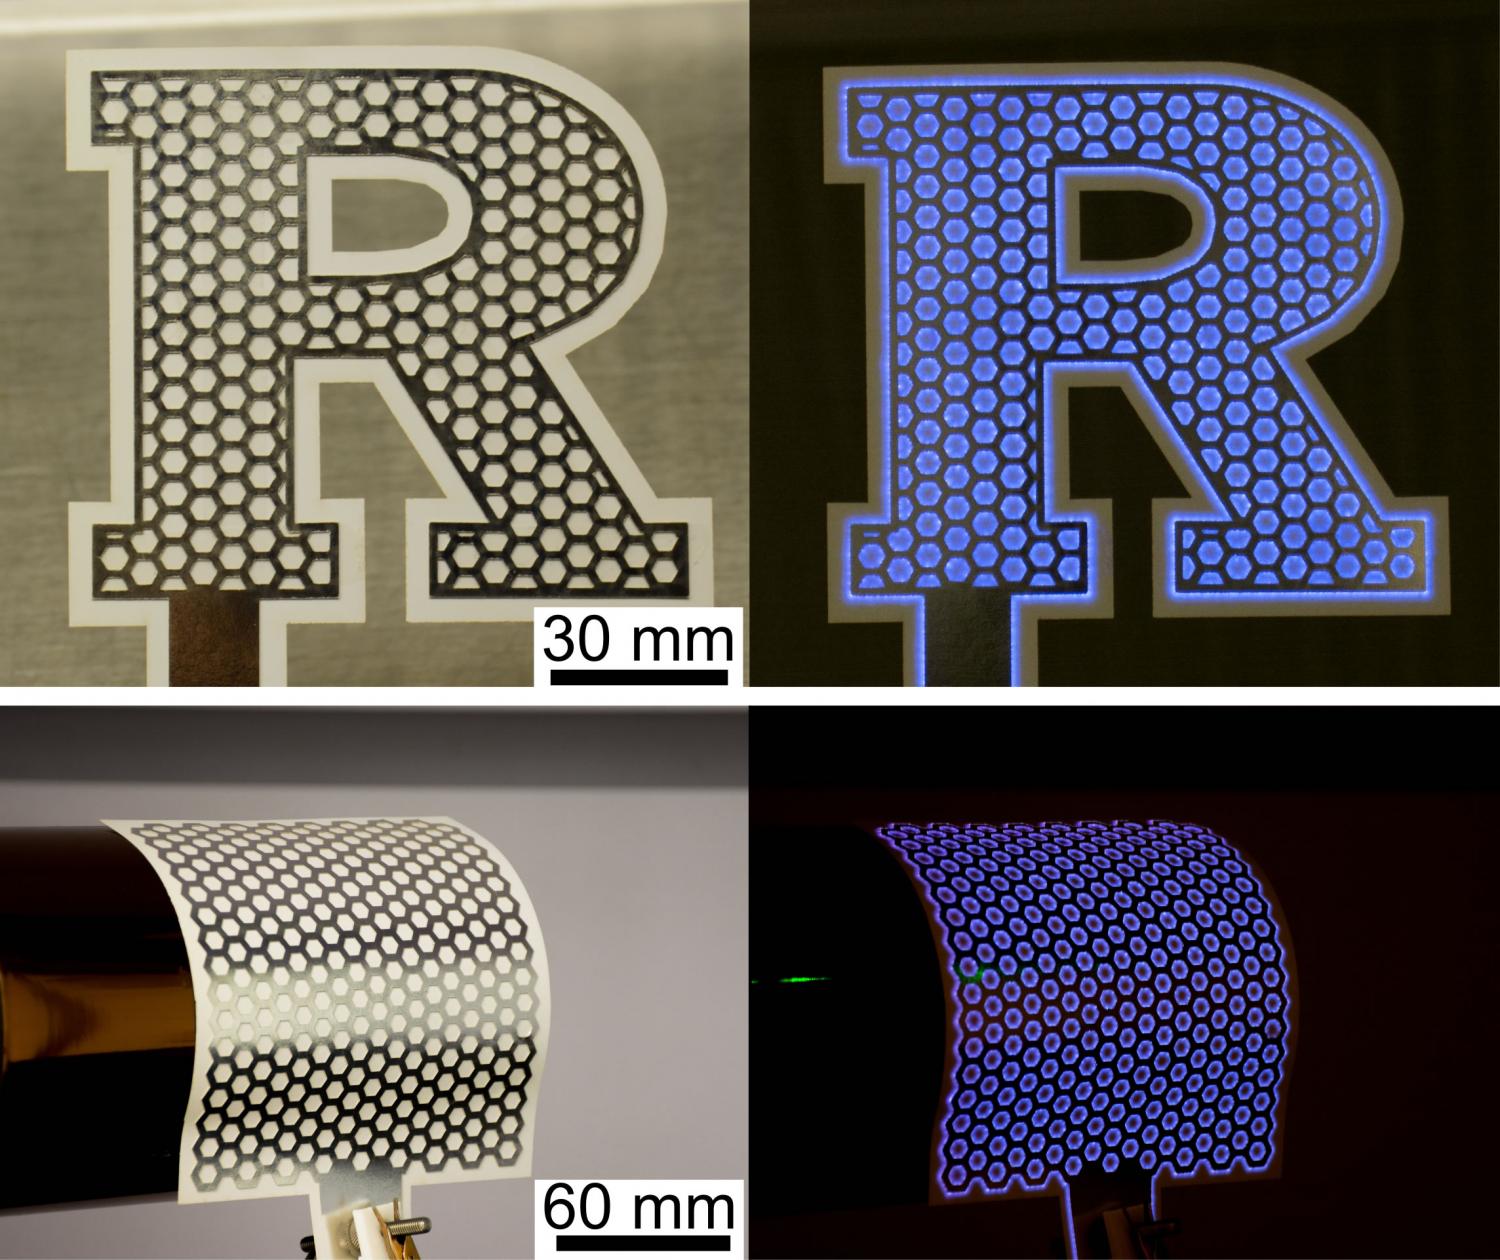 Paper-based plasma generators—consisting of laminated assemblies of honeycomb-patterned, metallized paper—are capable of sanitizing surfaces with 10 seconds of treatment. These devices are also customizable into varied planar geometries and bendable/mechanically flexible to conform to curved surfaces. Image credit: Jingjin Xie 